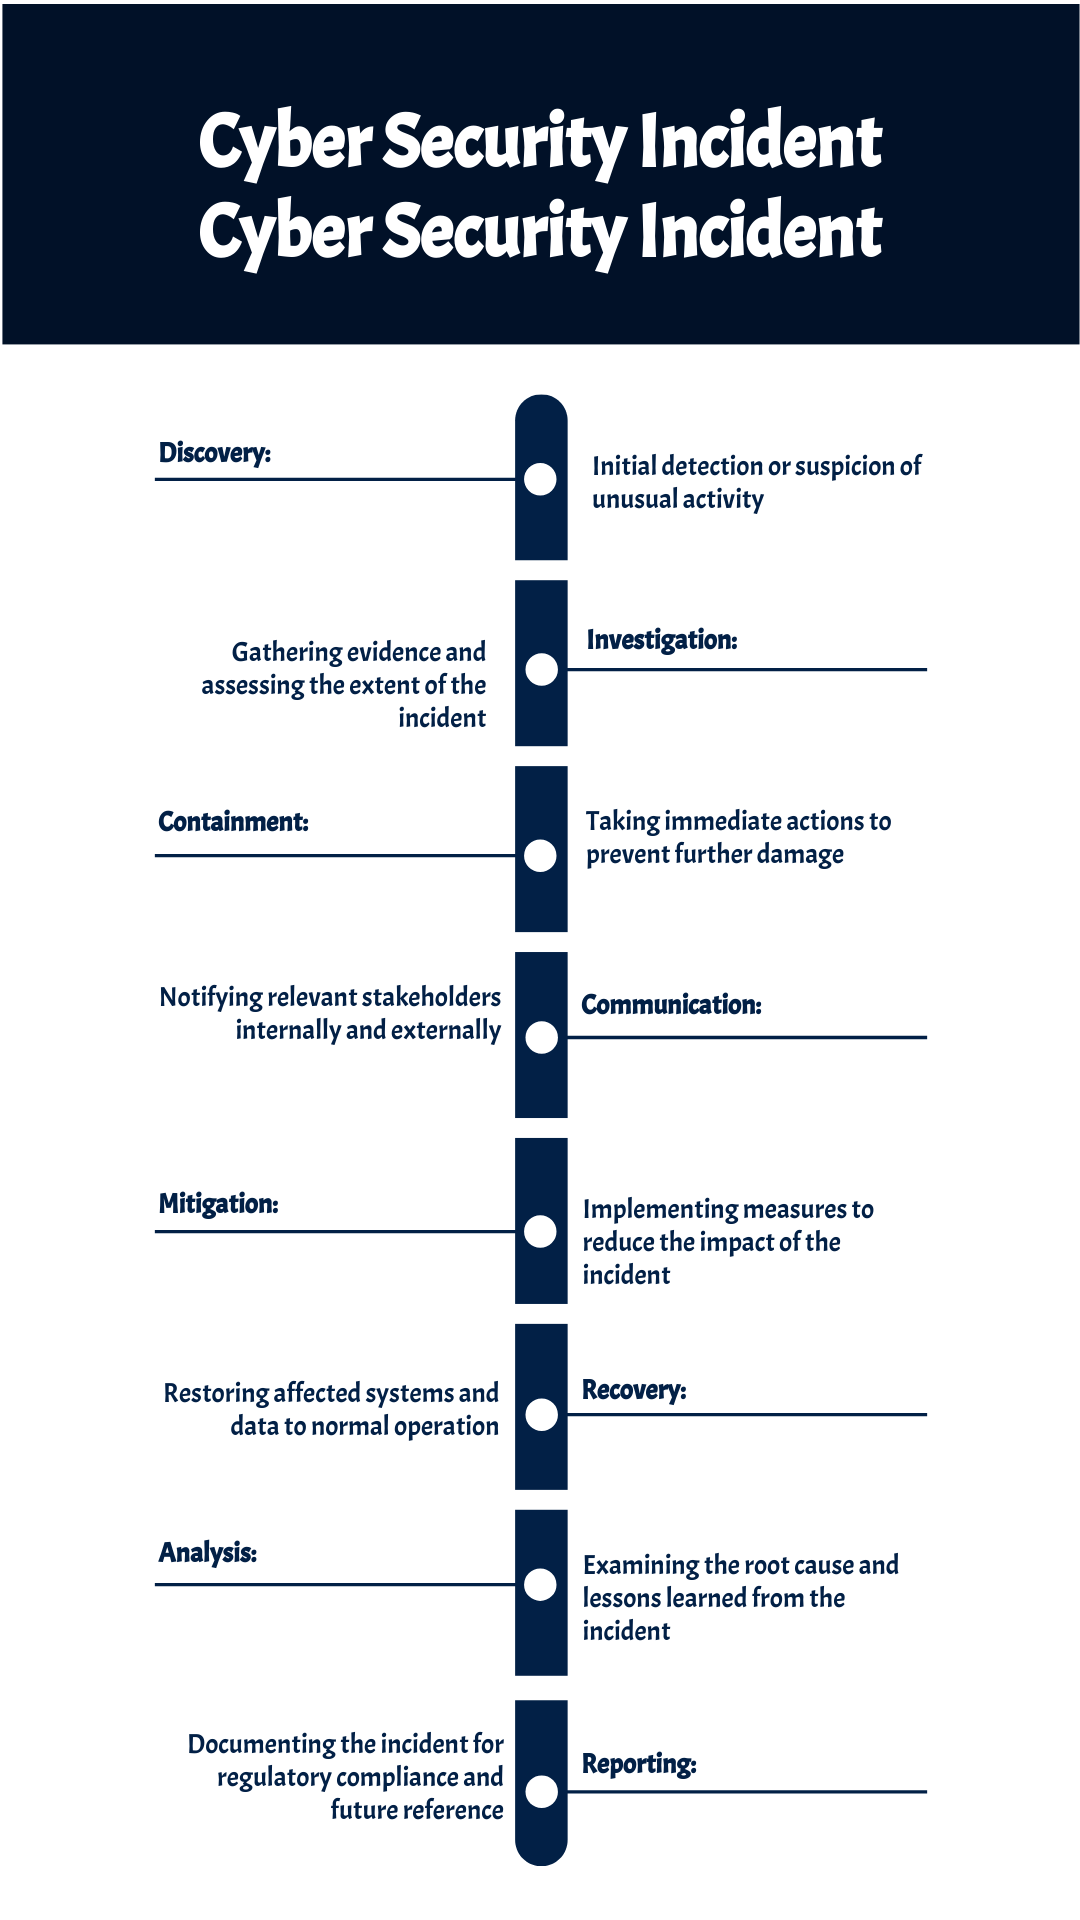 Cyber Security Incident Timeline